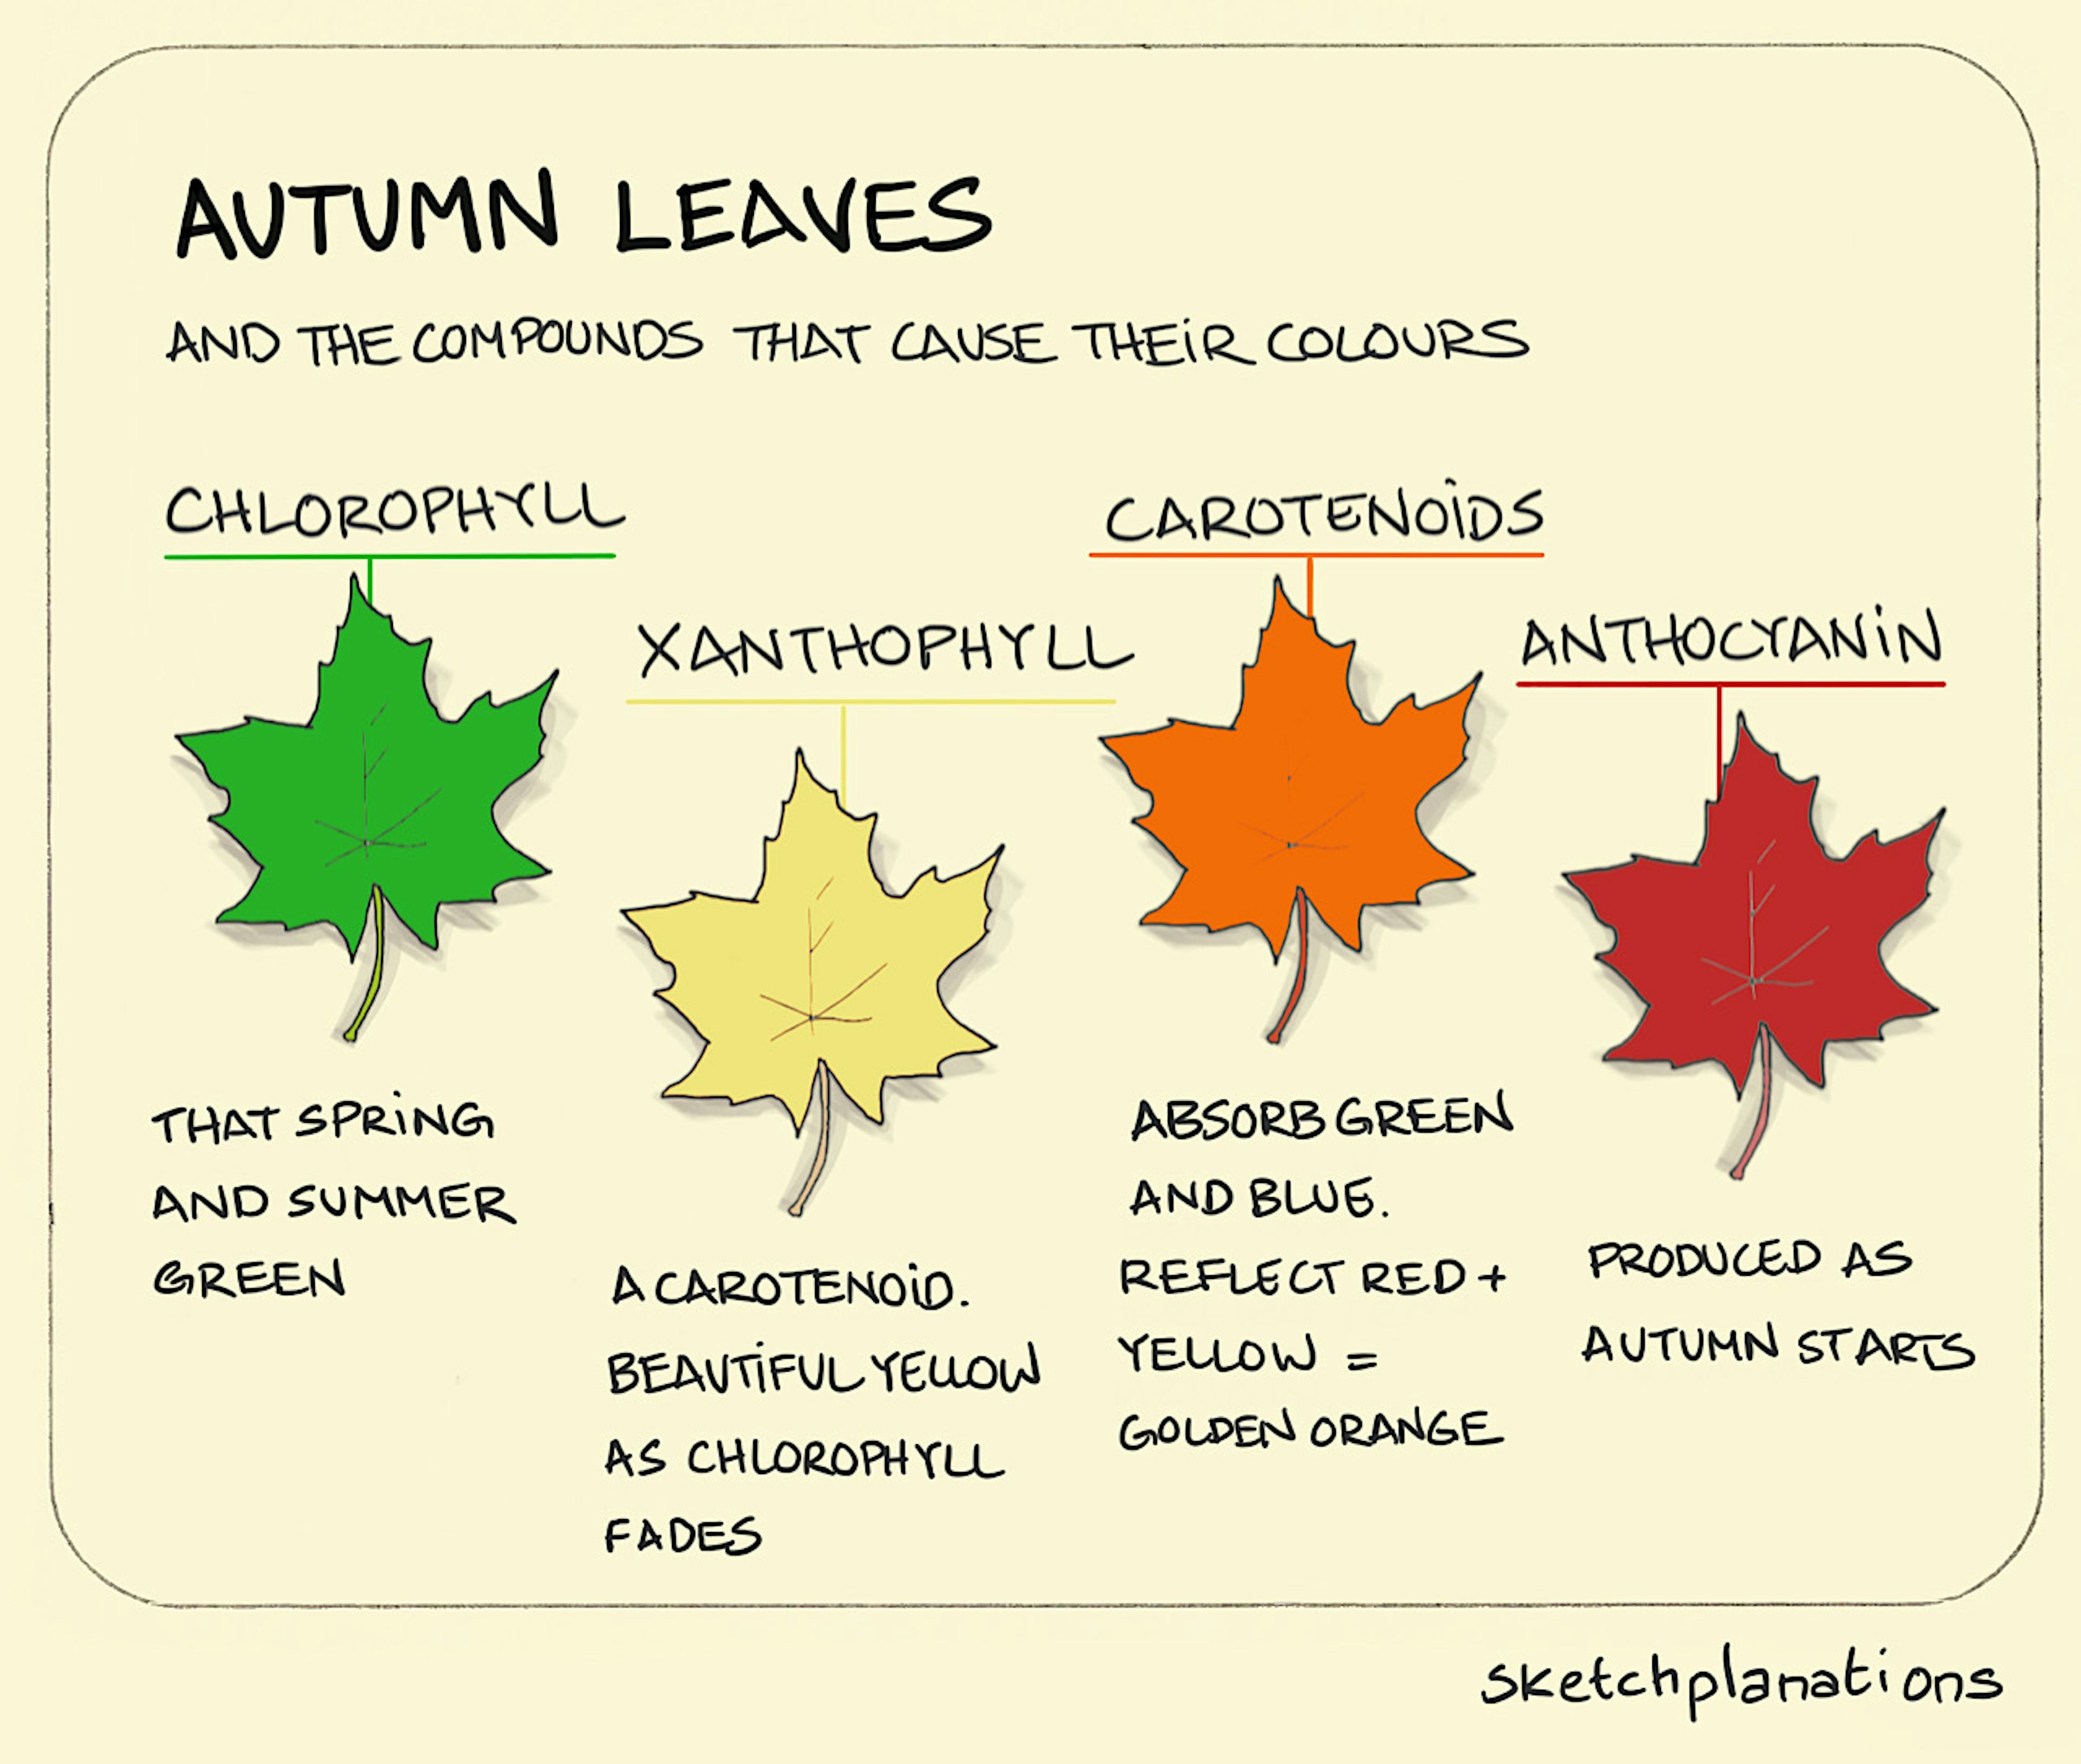 What causes the colors of Autumn leaves and the compounds that make them